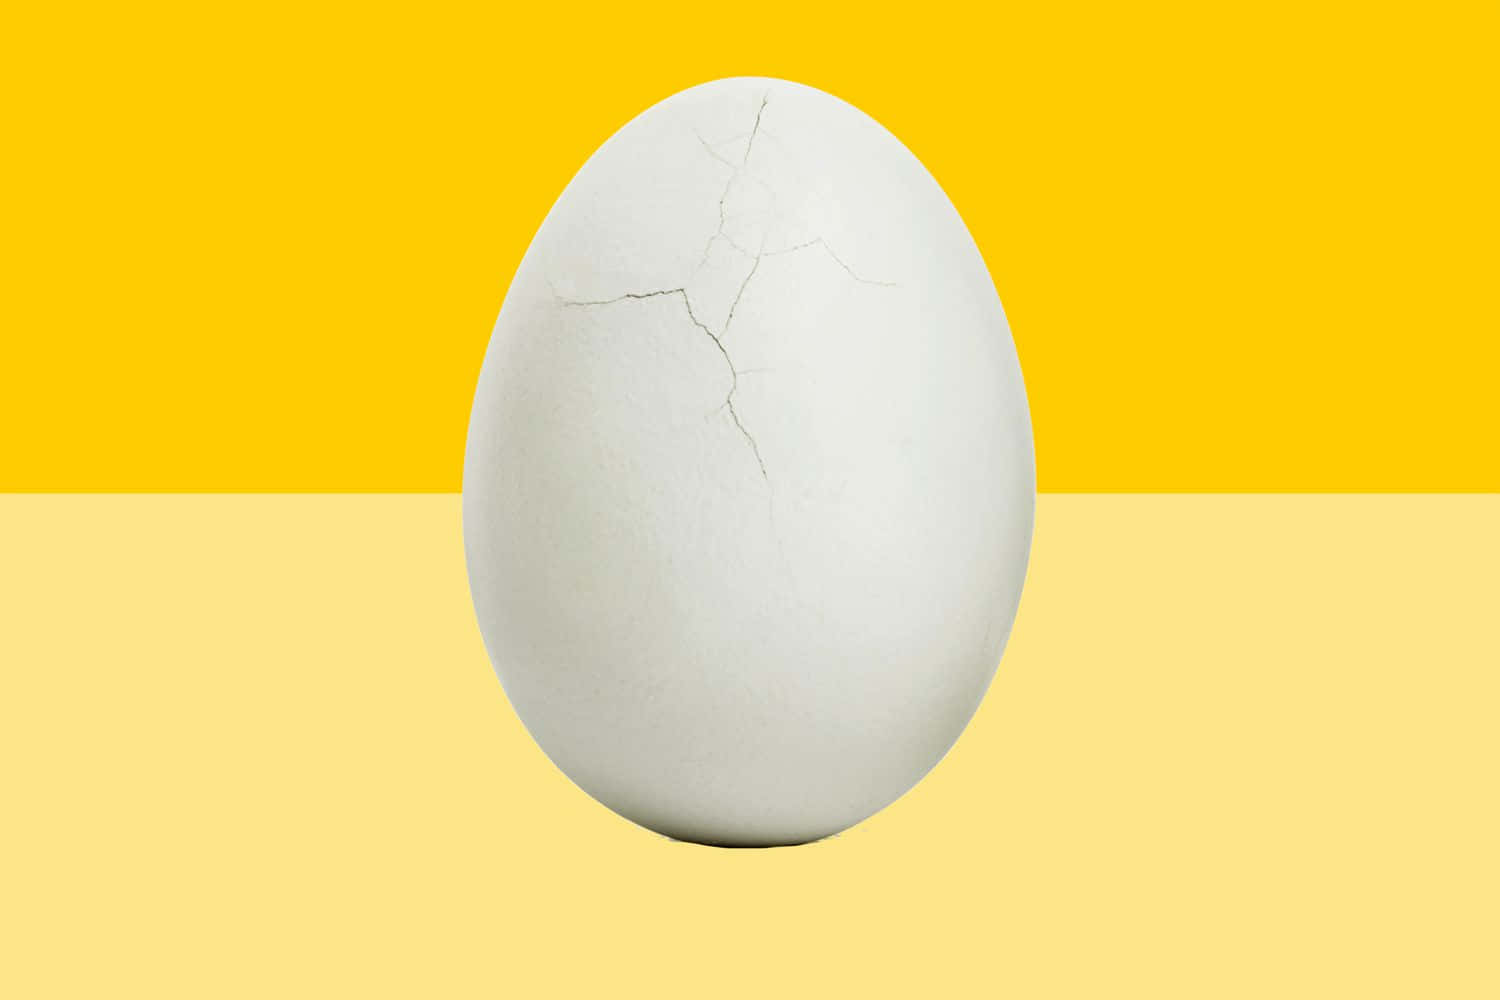 A delicious egg ready to be enjoyed